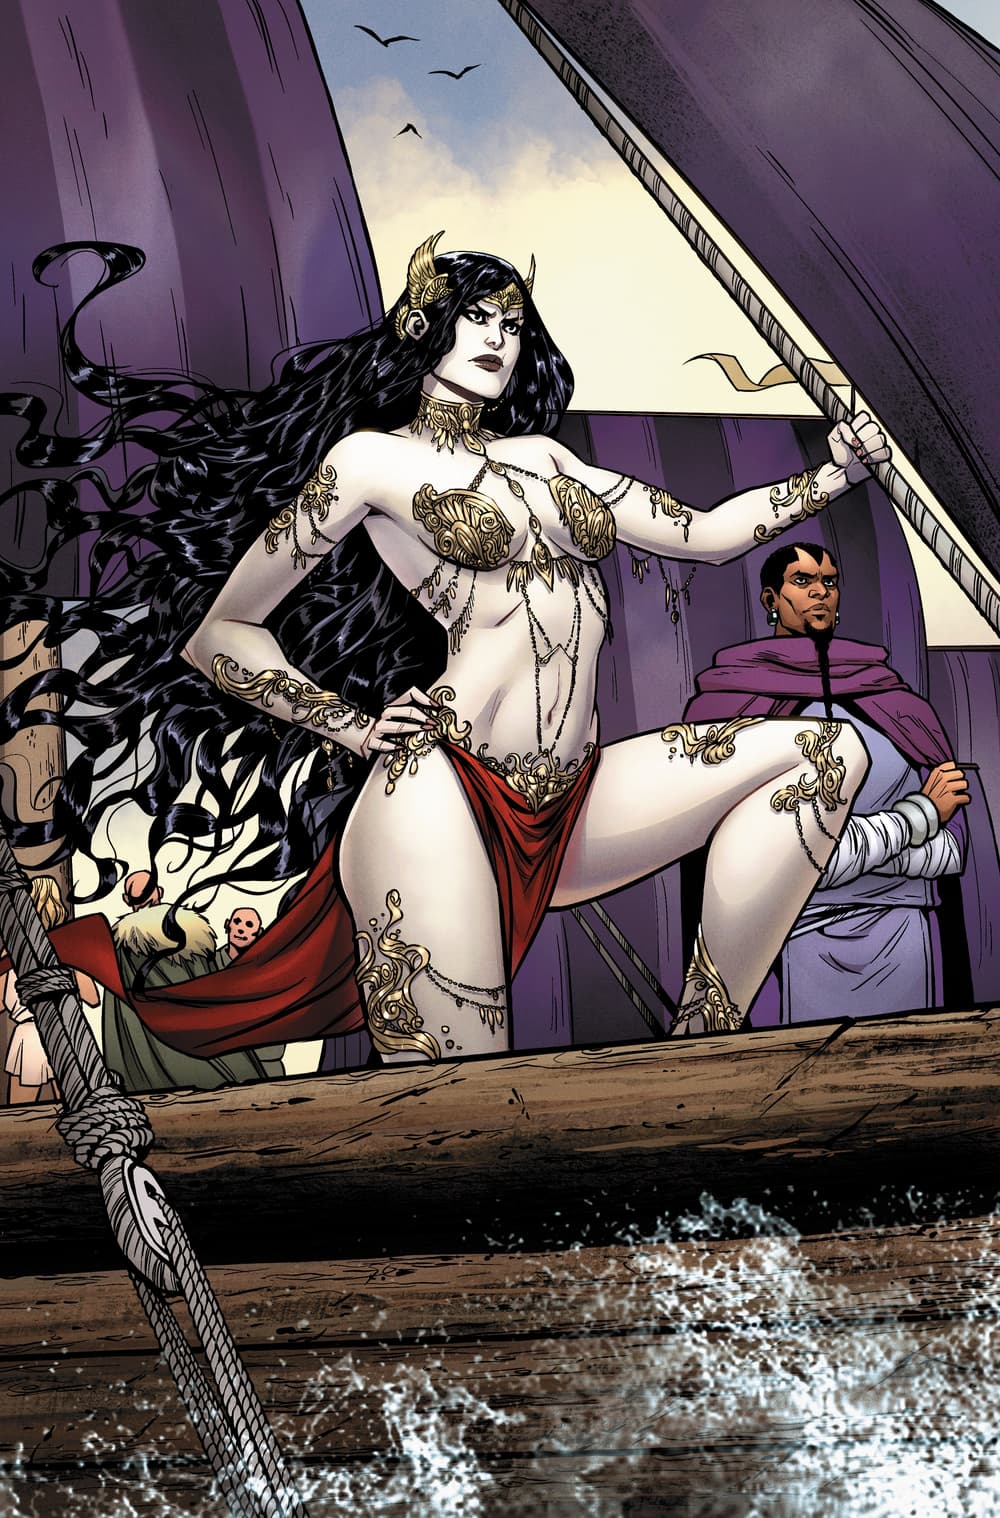 AGE OF CONAN: BELIT #5 interior art by Kate Niemczyk, finsihes by Scott Hanna and Andrea Di Vito, with colors by Jason Keith